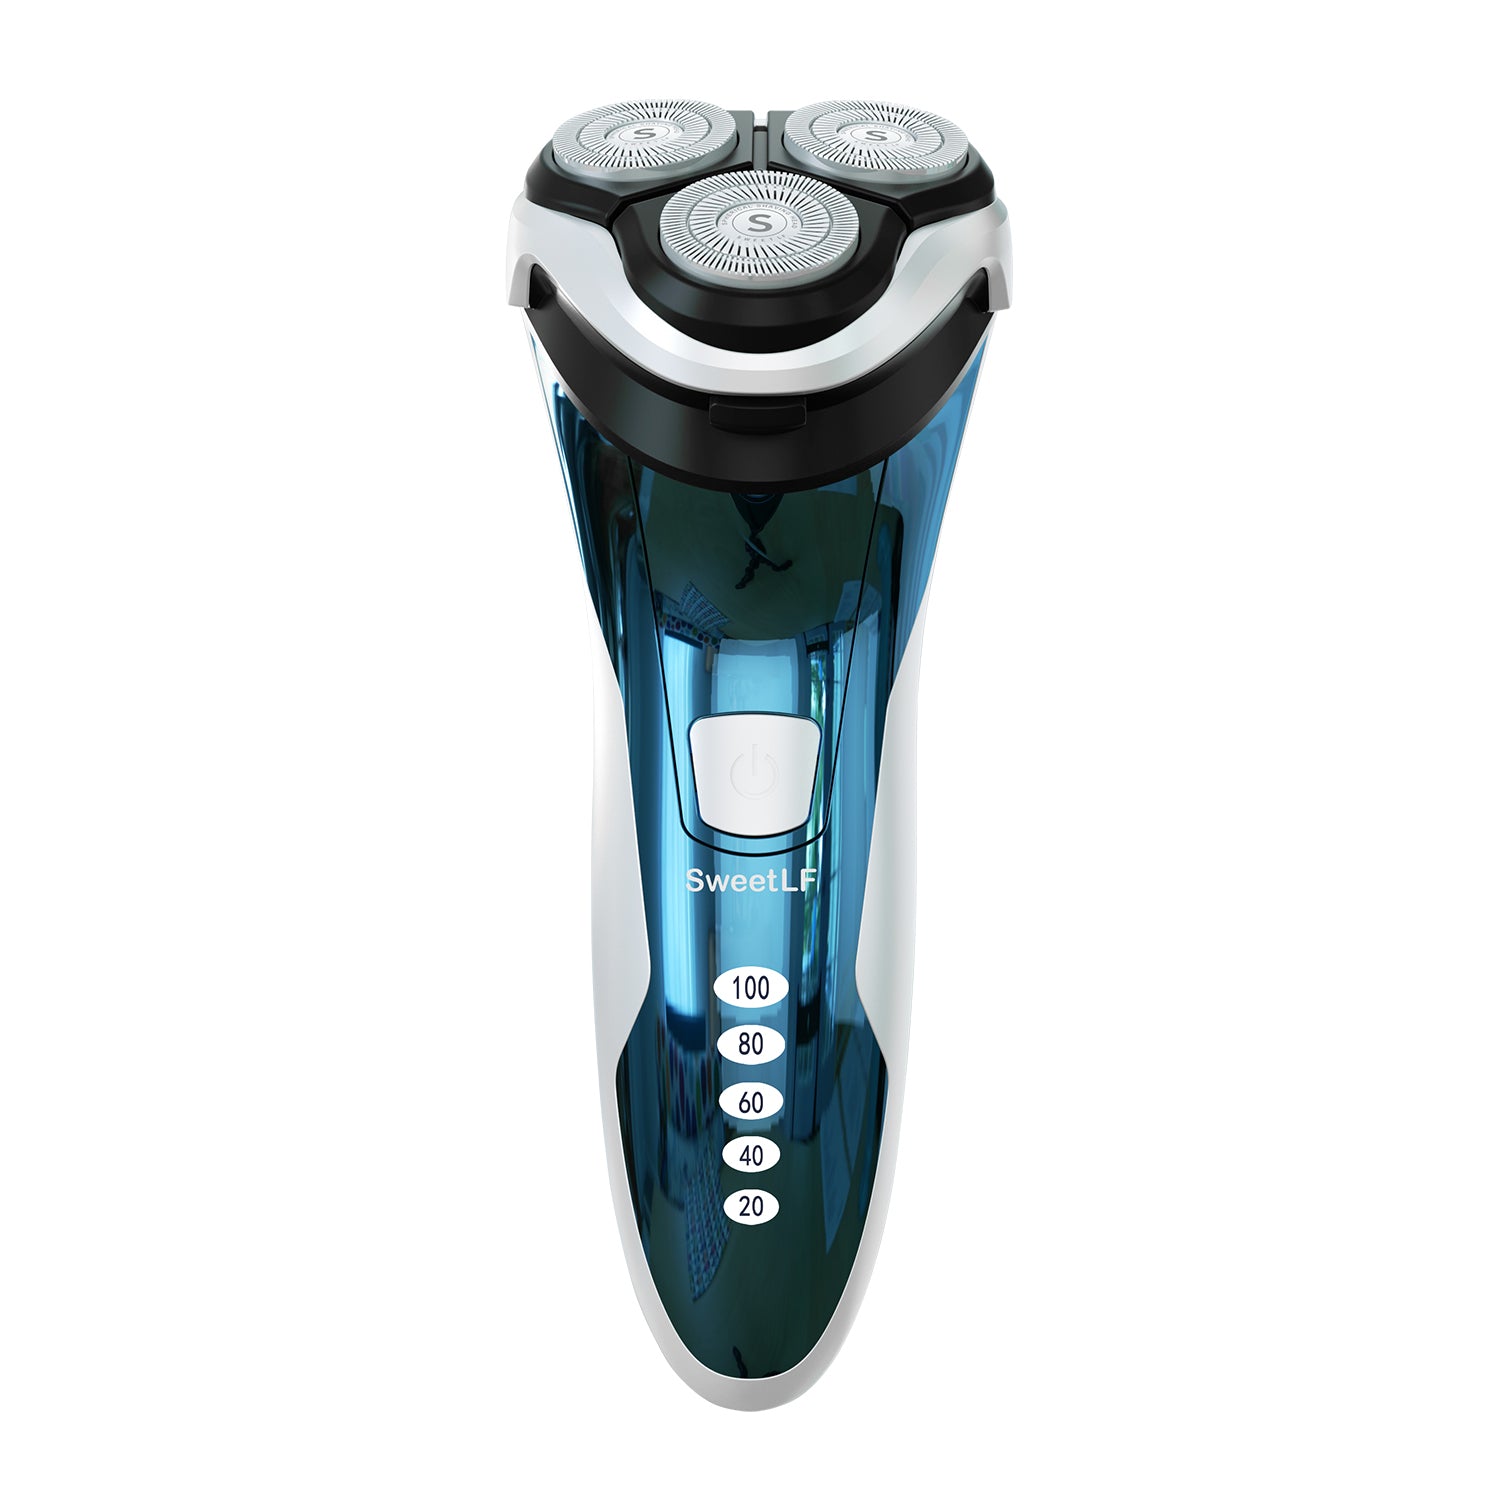 SweetLF Wet & Dry Waterproof Electric Shaver for men with Pop Up Trimmer Blue